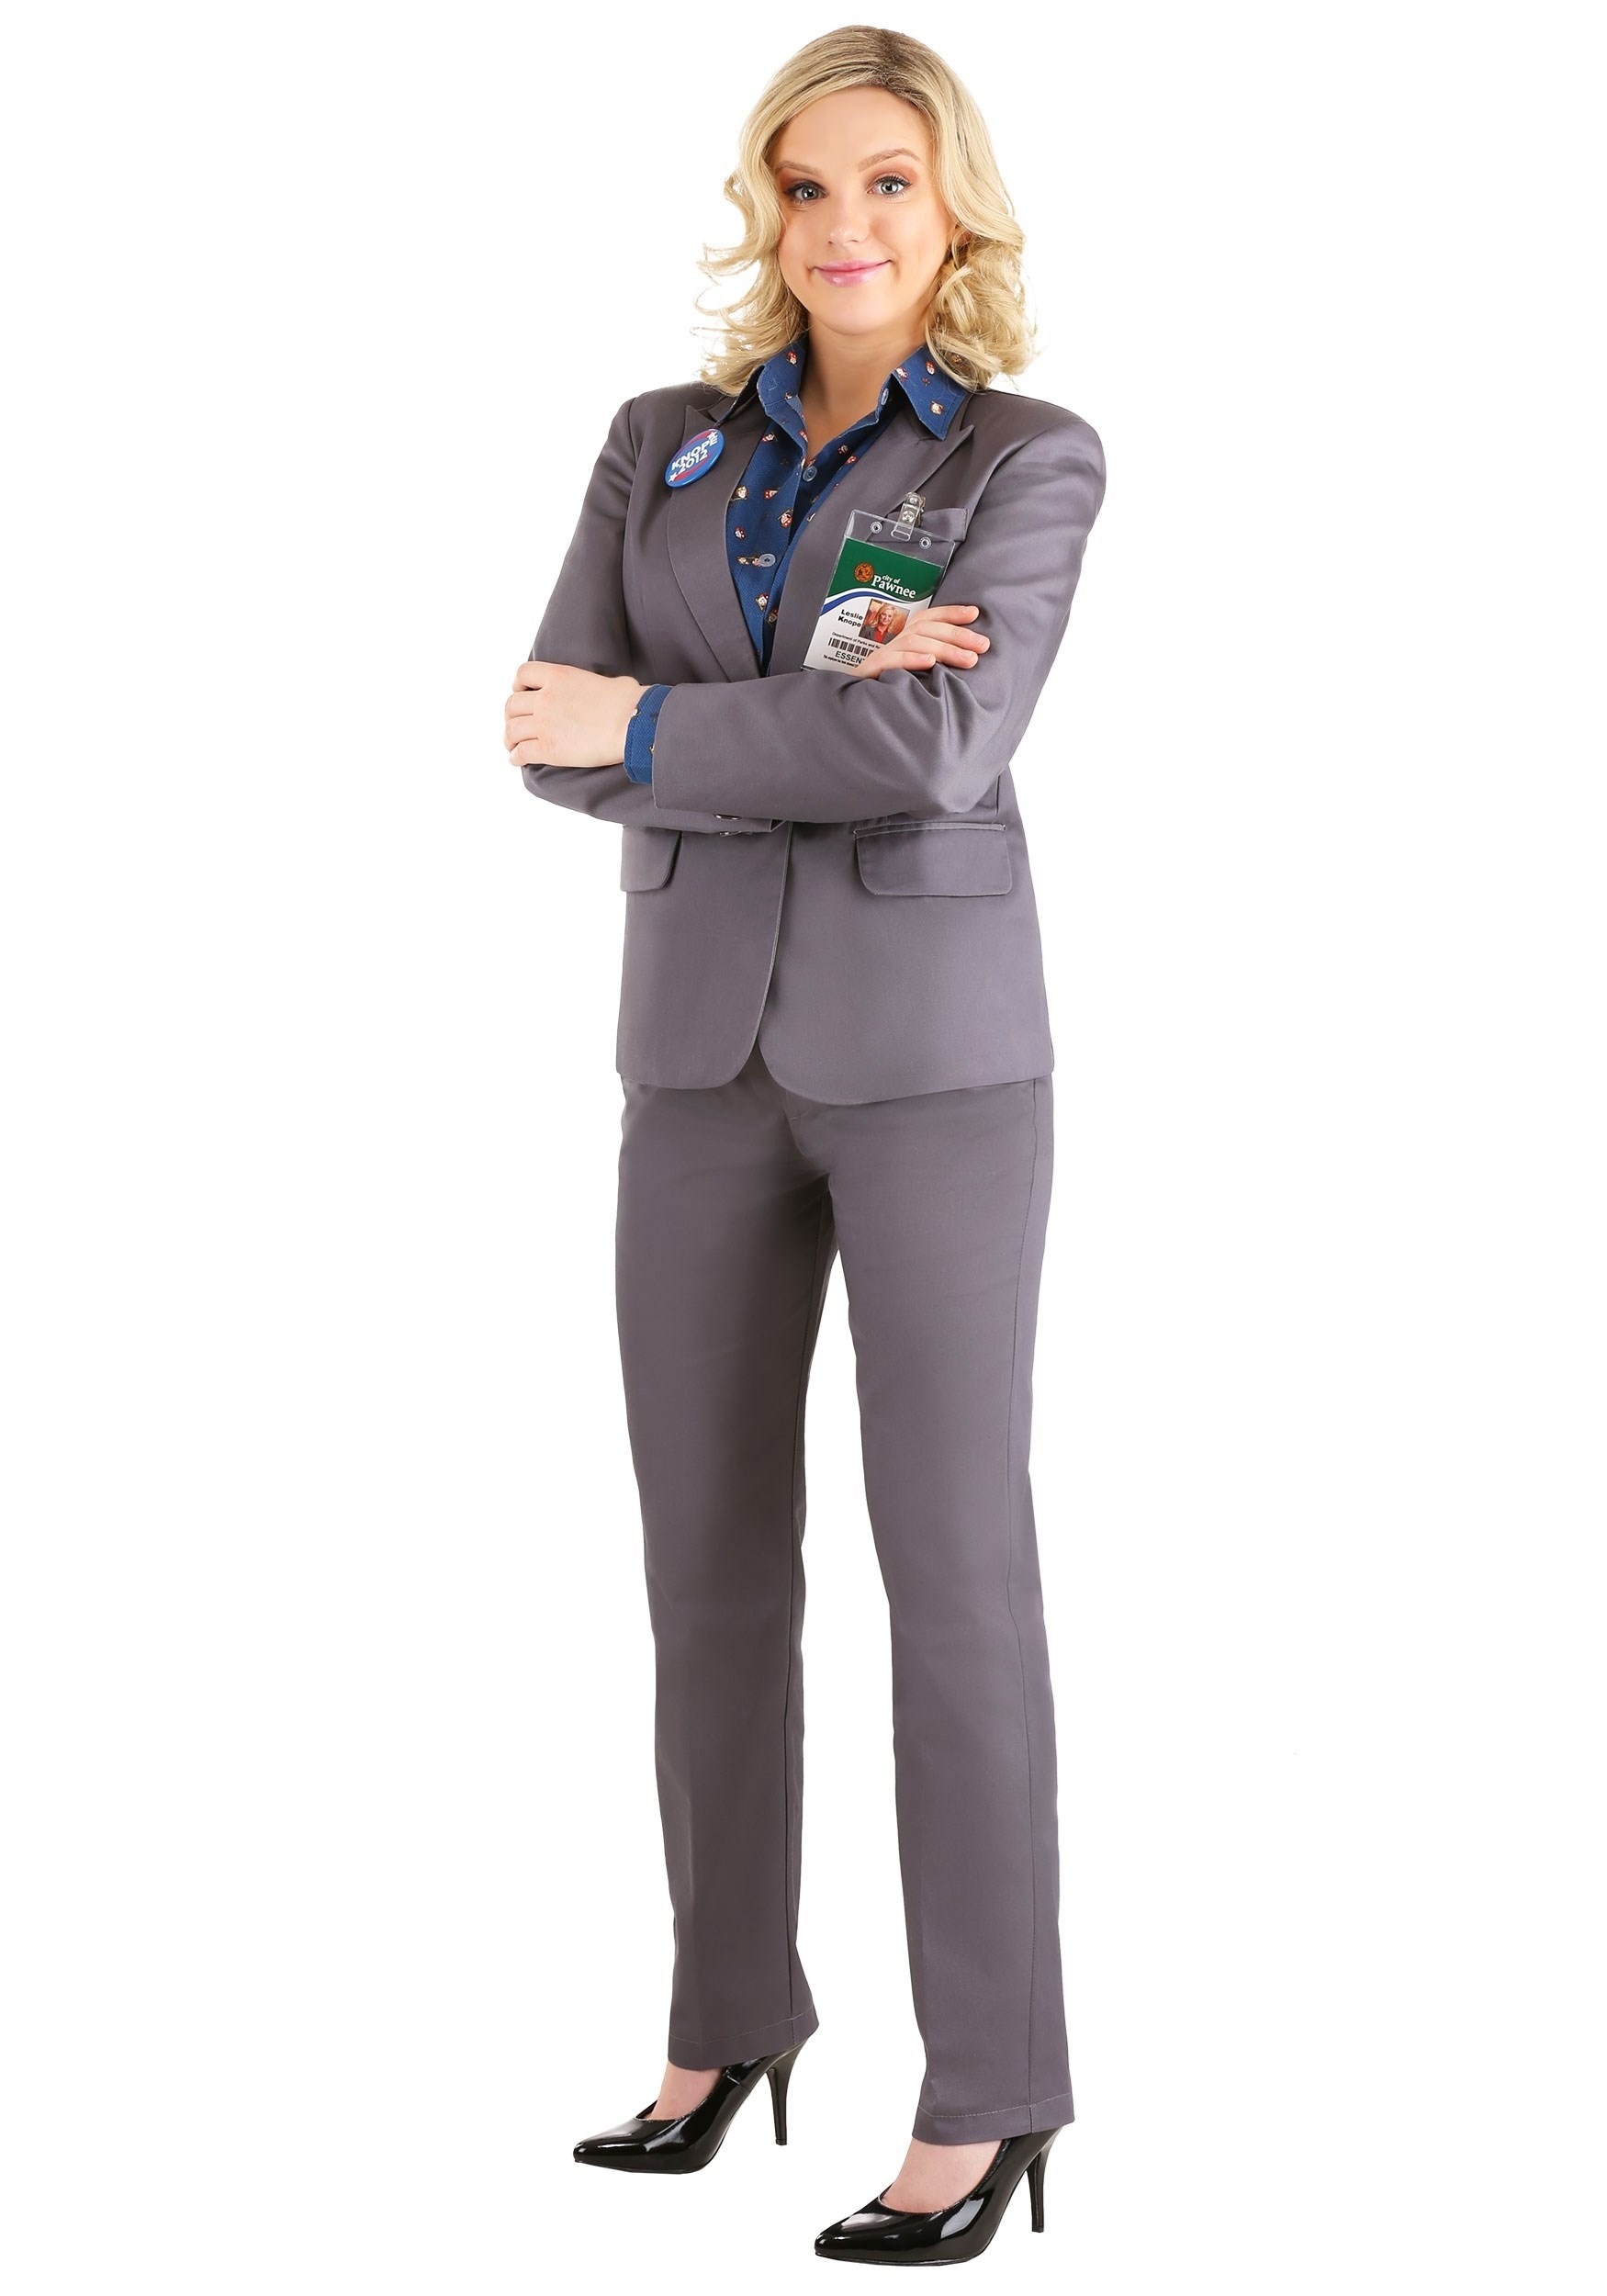 Photos - Fancy Dress A&D FUN Costumes Parks and Recreation Leslie Knope Women's  Costume 